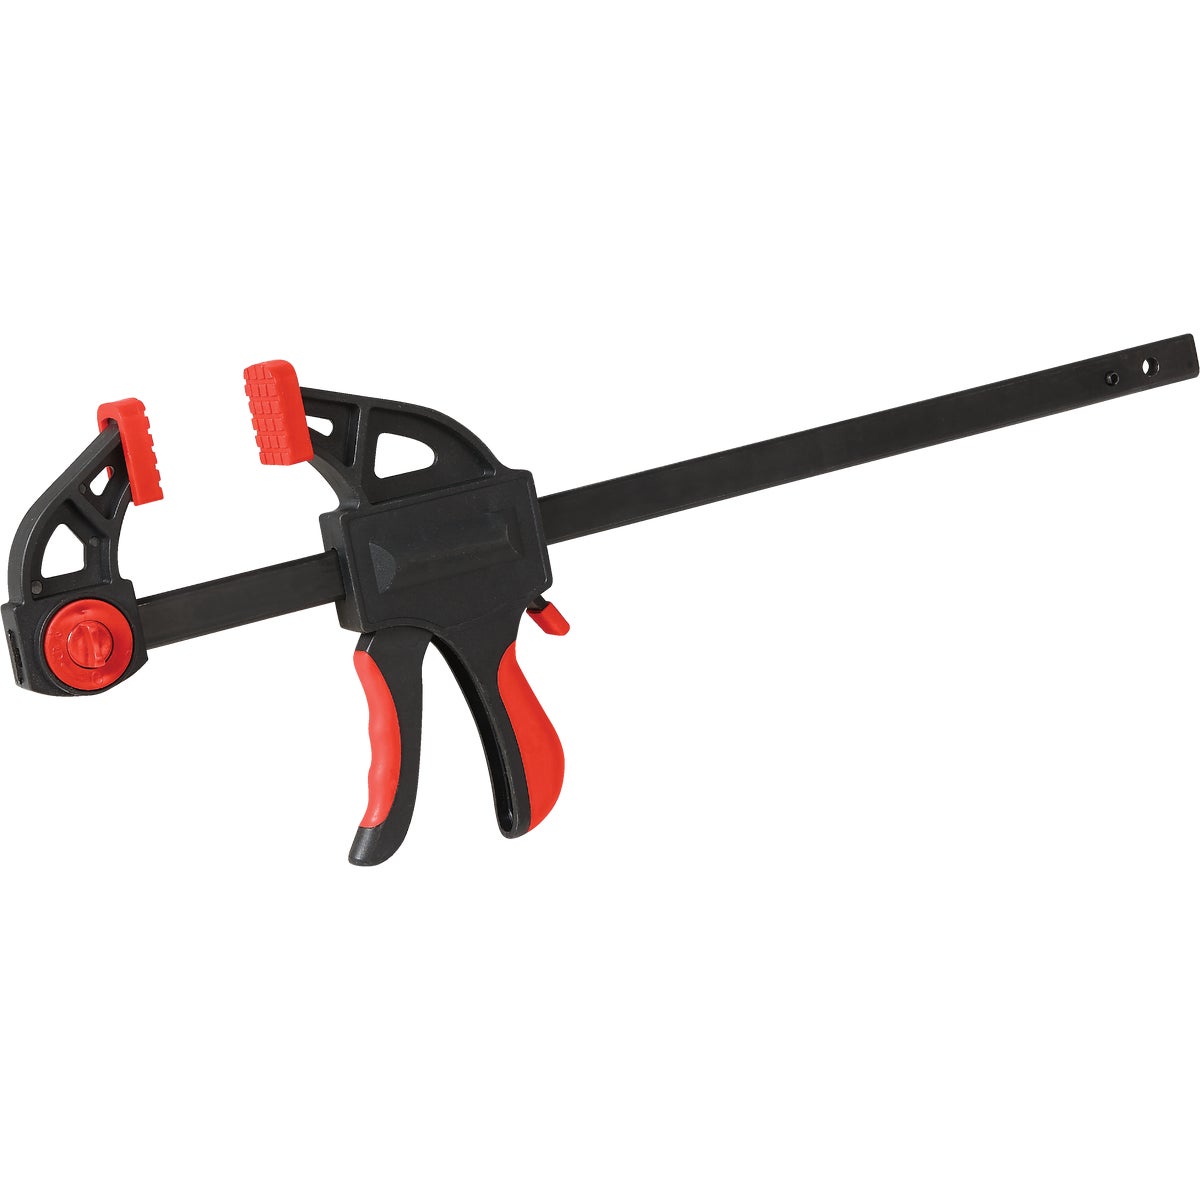 Do it Pistol Grip 12 In. One-Hand Bar Clamp and Spreader